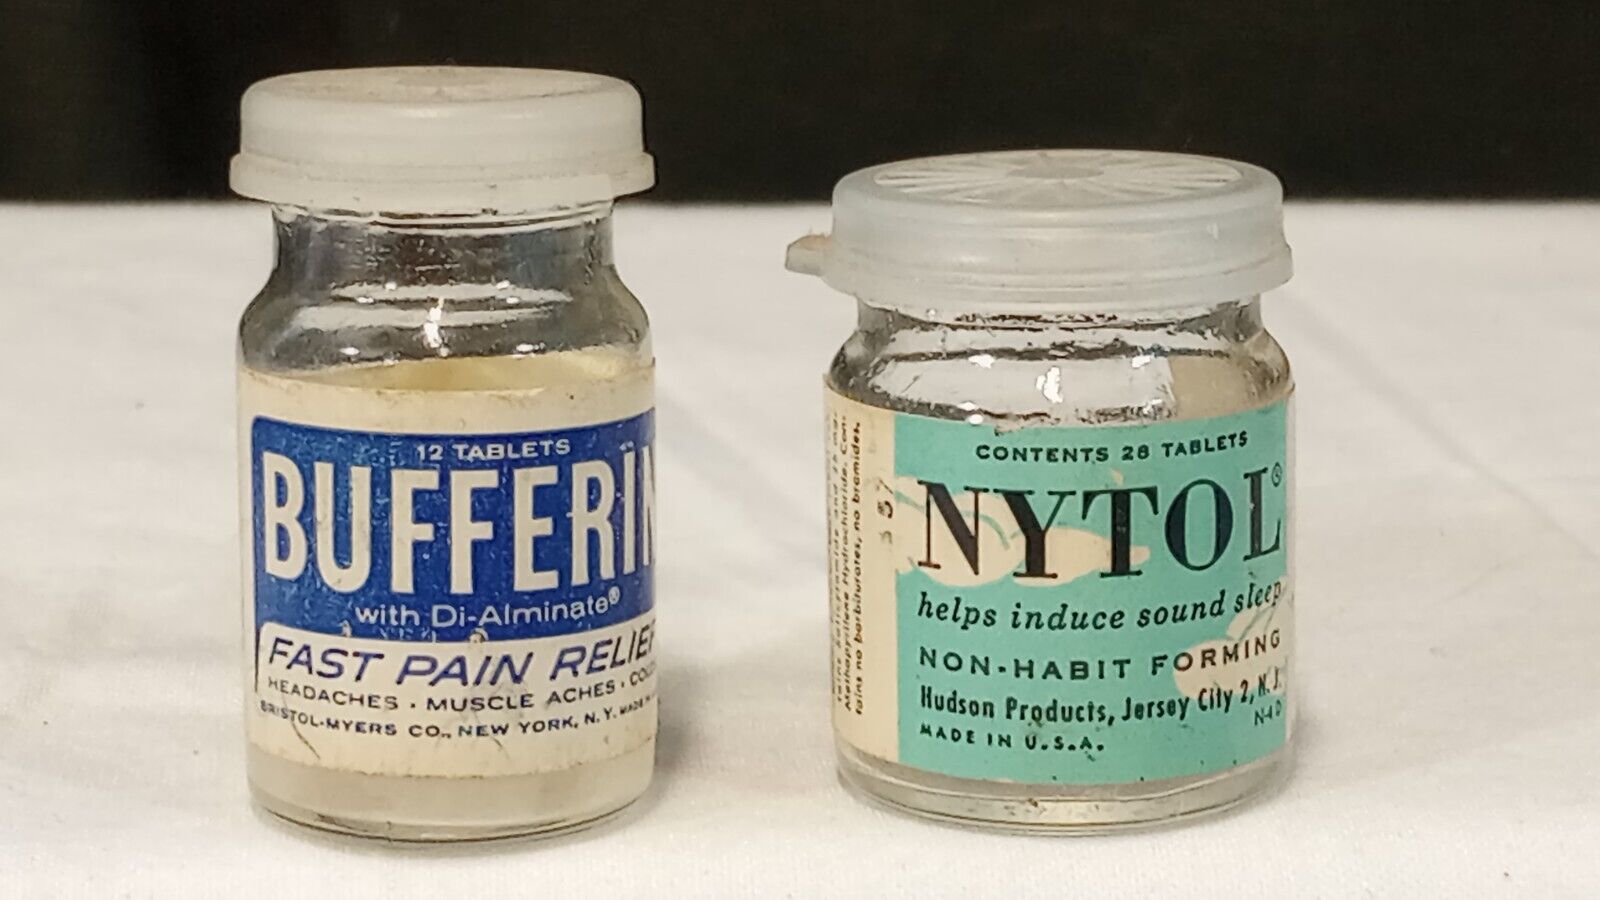 Vintage Glass Bottles Bufferin and Nytol with Plastic Lids